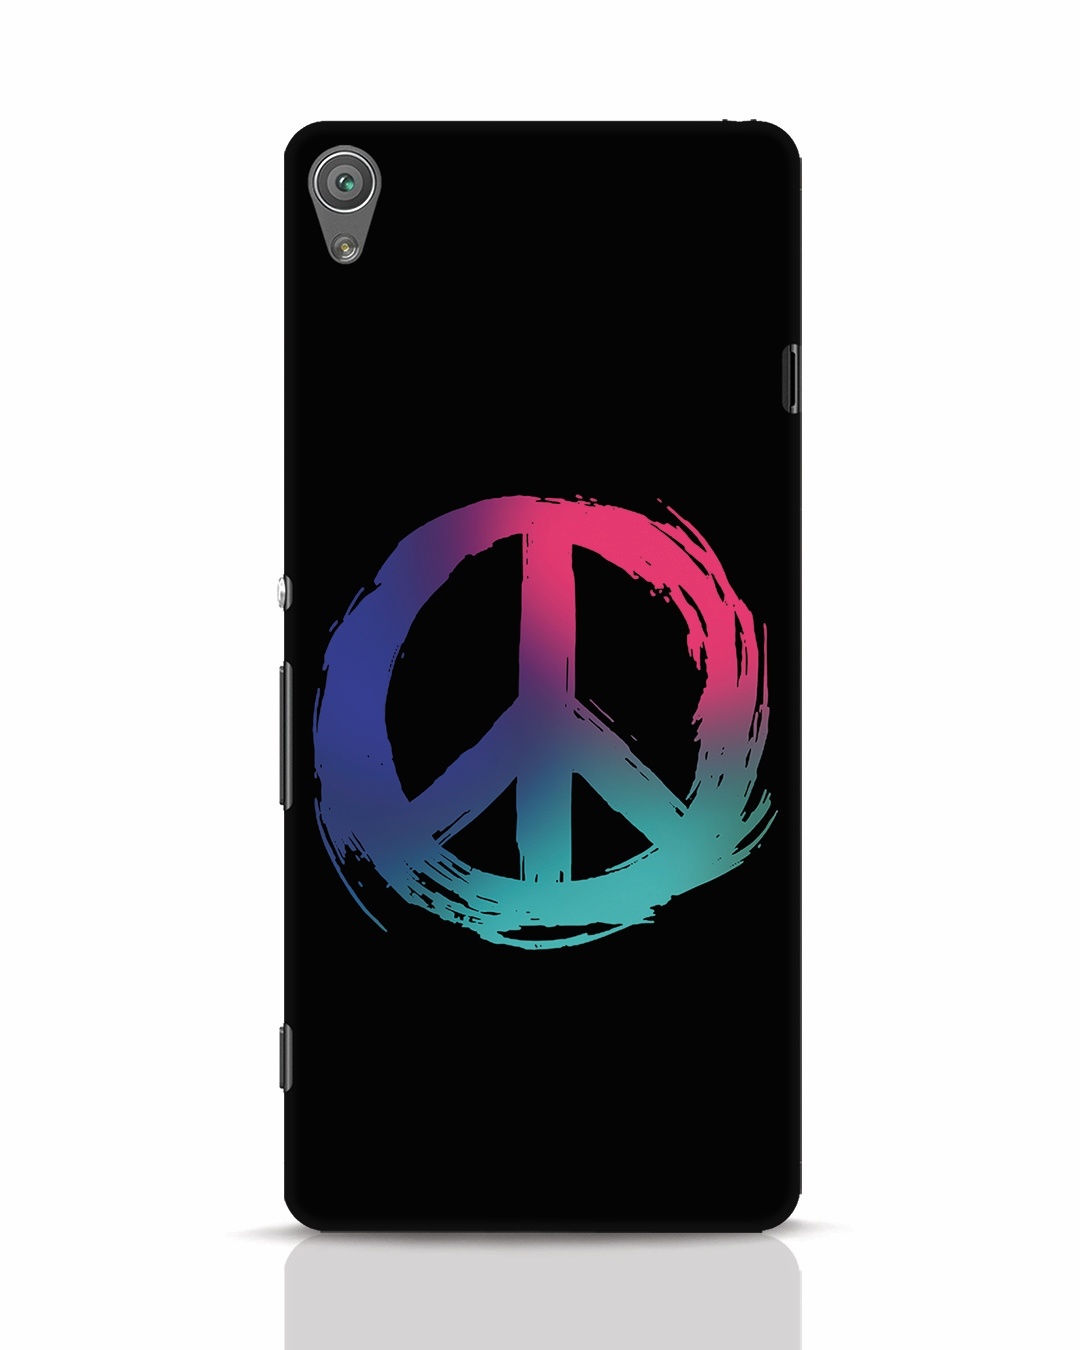 Colors Of Peace Sony Xperia XA Mobile Cover Sony Xperia XA Mobile Covers Bewakoof.com